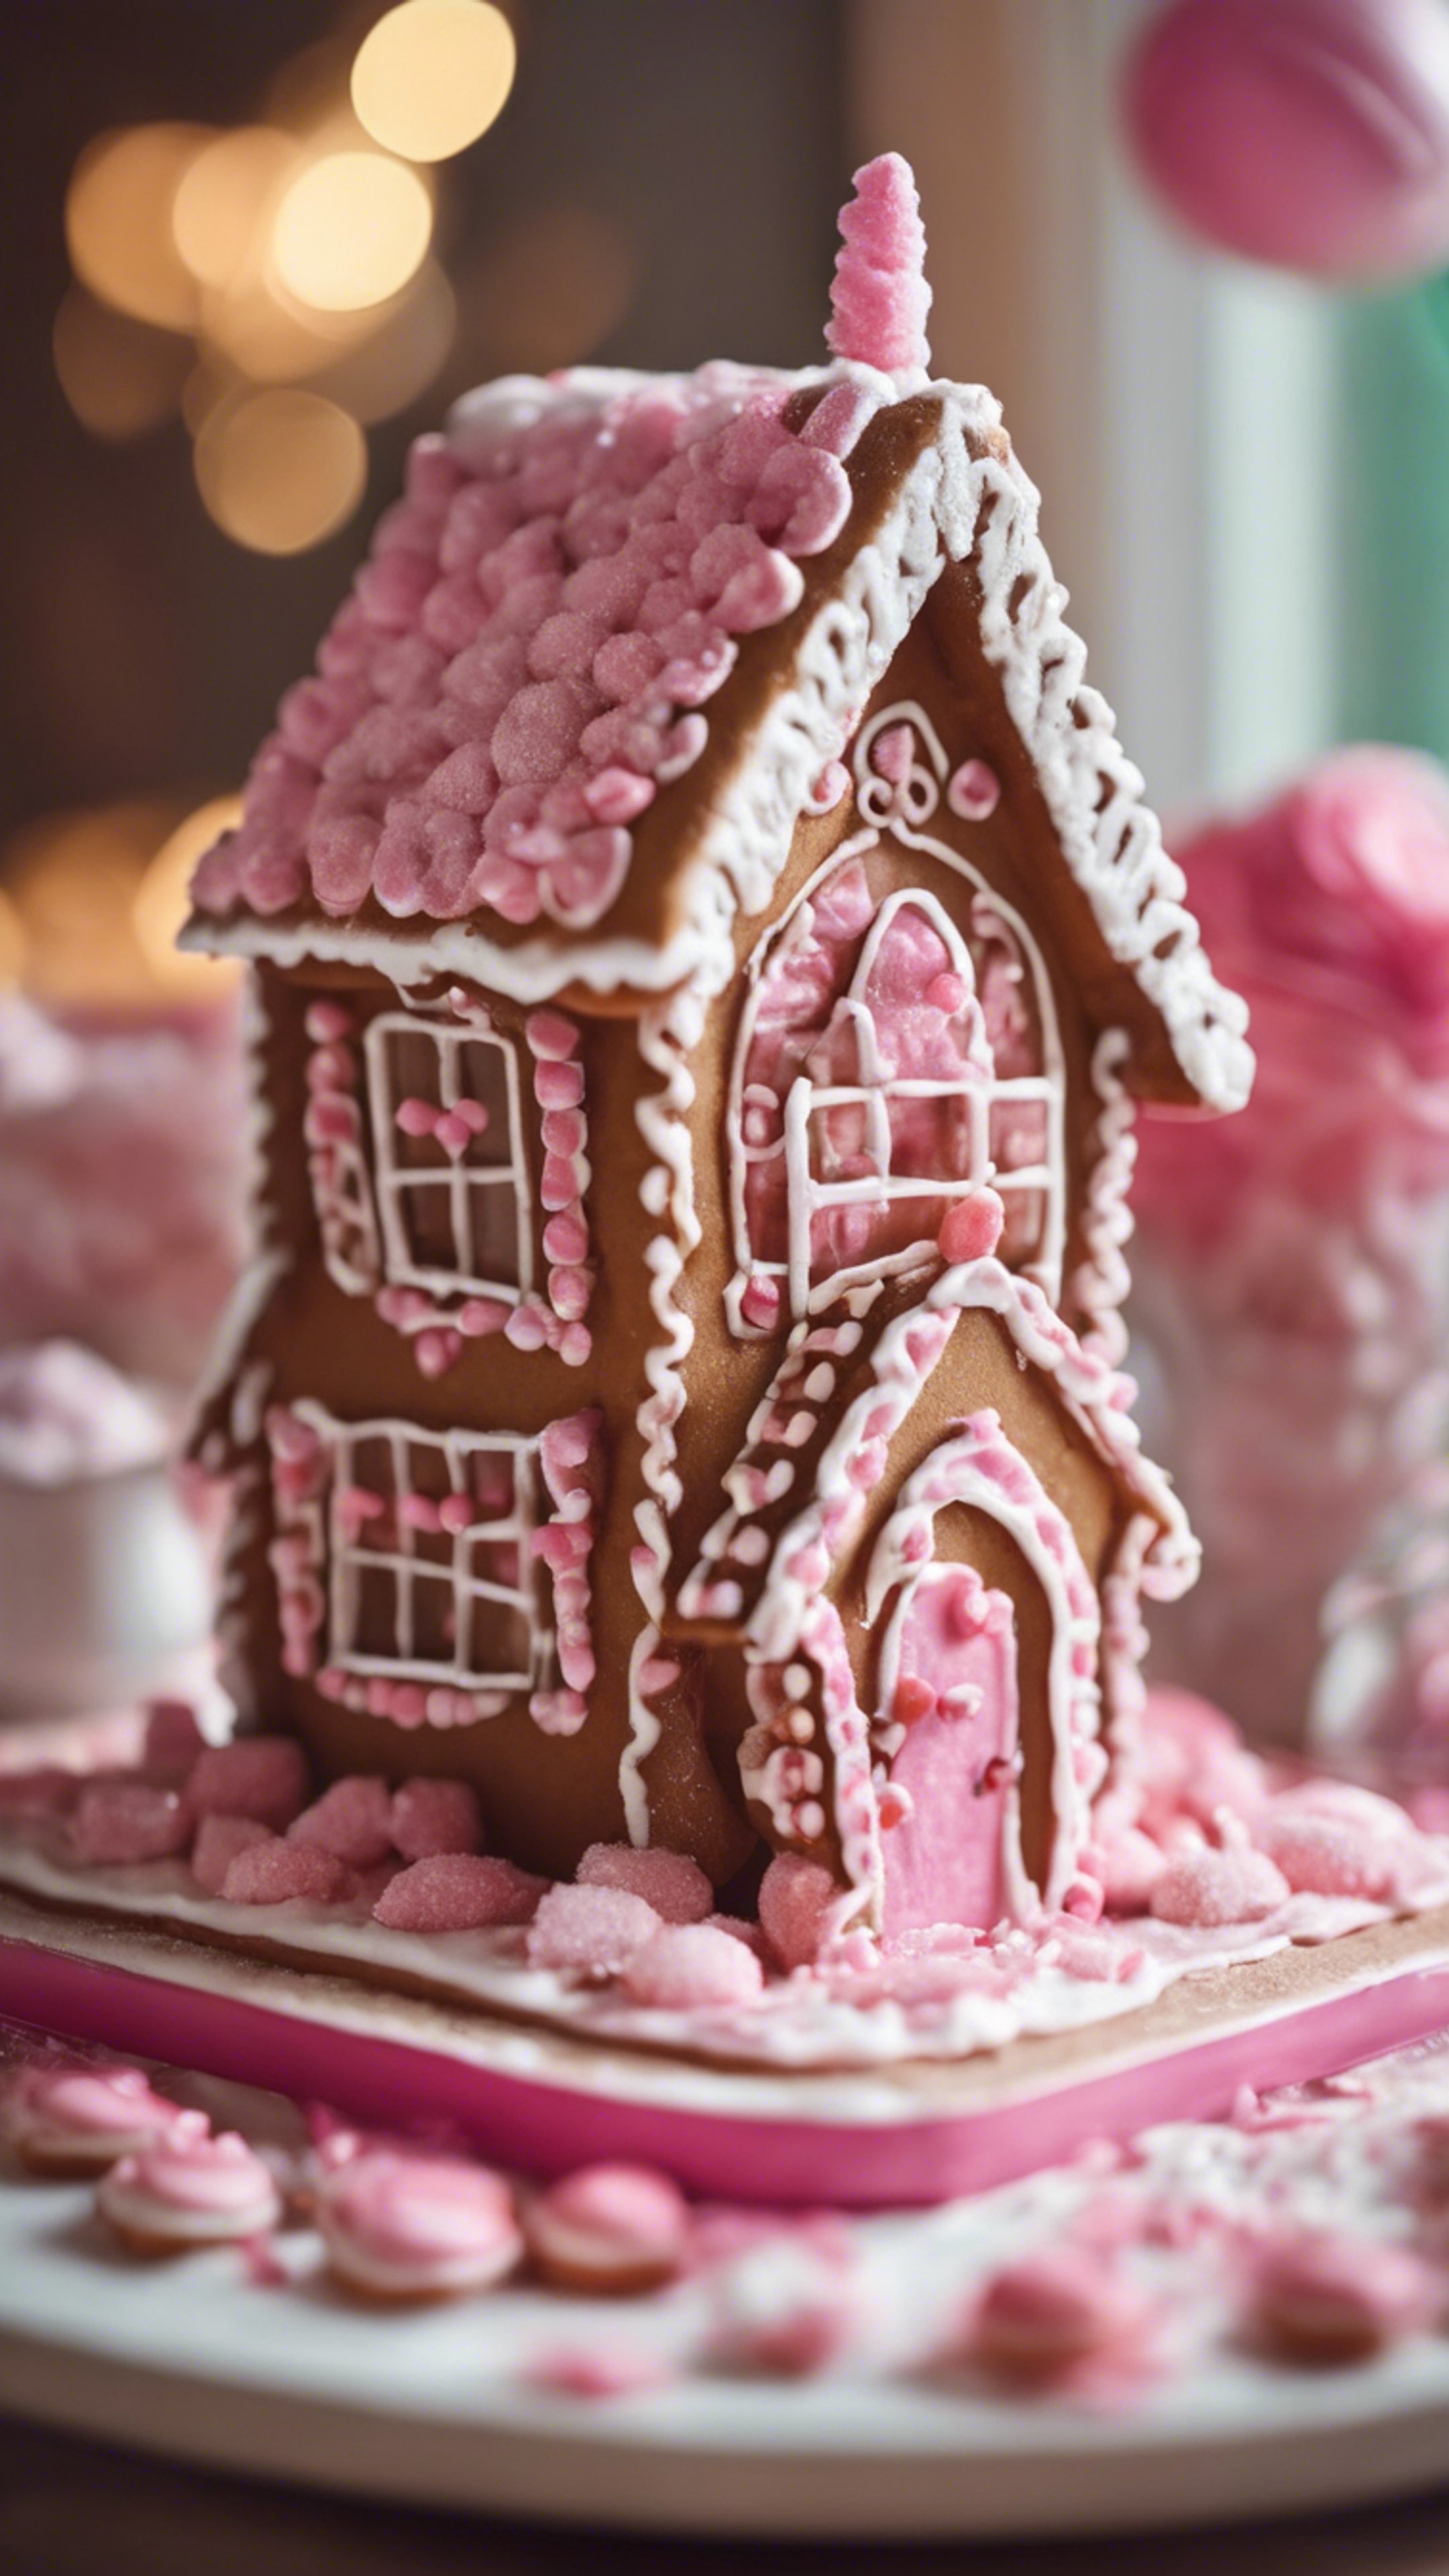 A cute gingerbread house adorned with pink icing and candy. Hintergrund[80166f7992434f38b590]